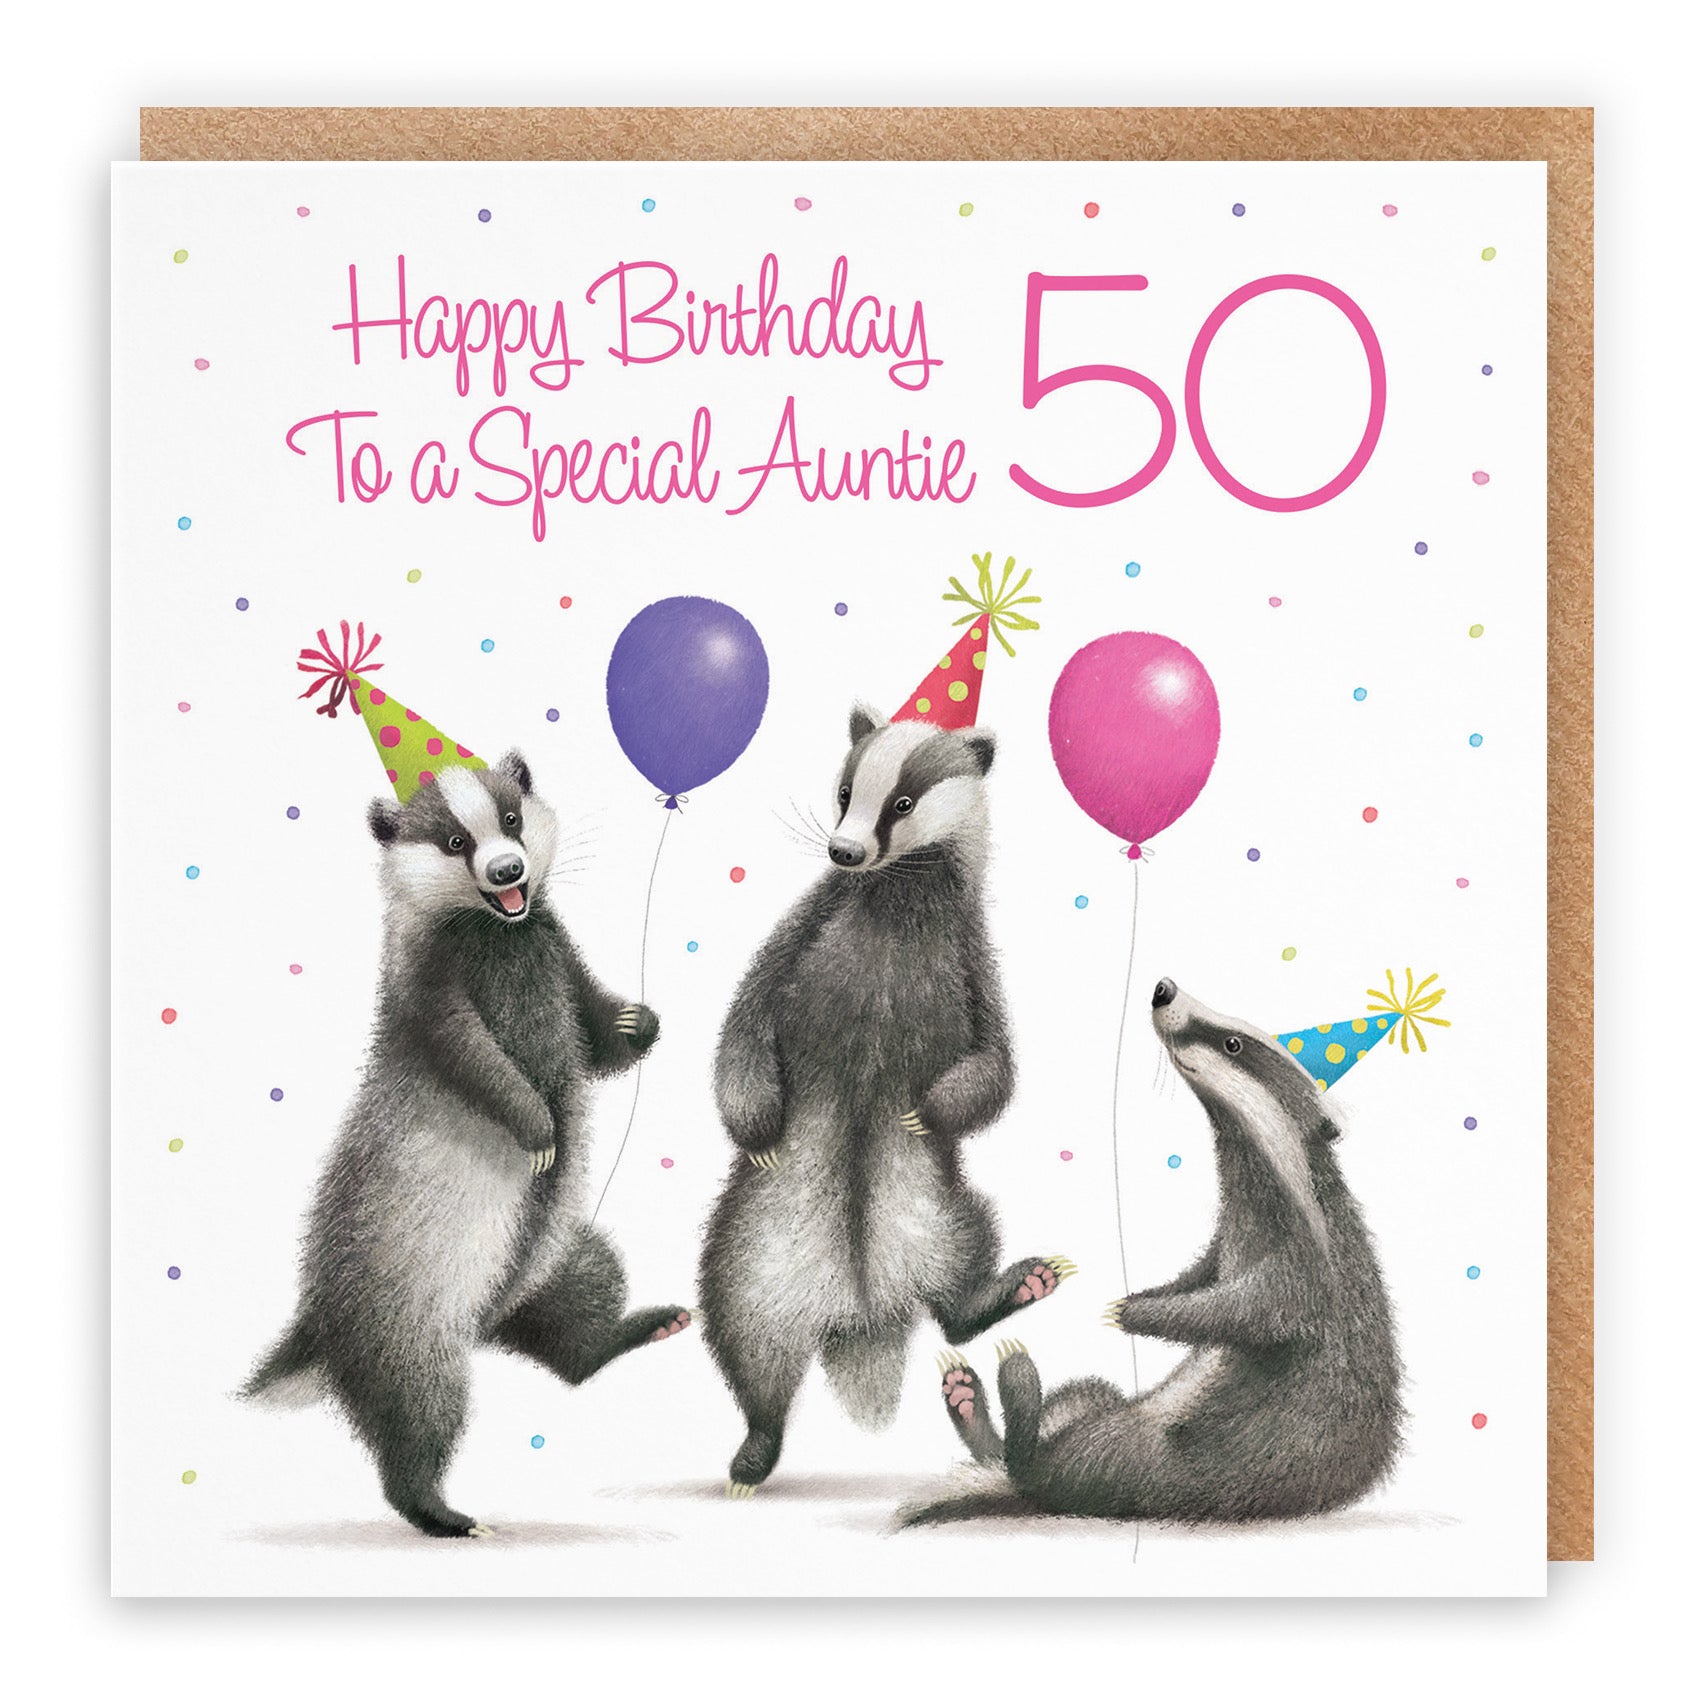 50th Auntie Badgers Birthday Card Milo's Gallery - Default Title (B0CRXWWHSY)